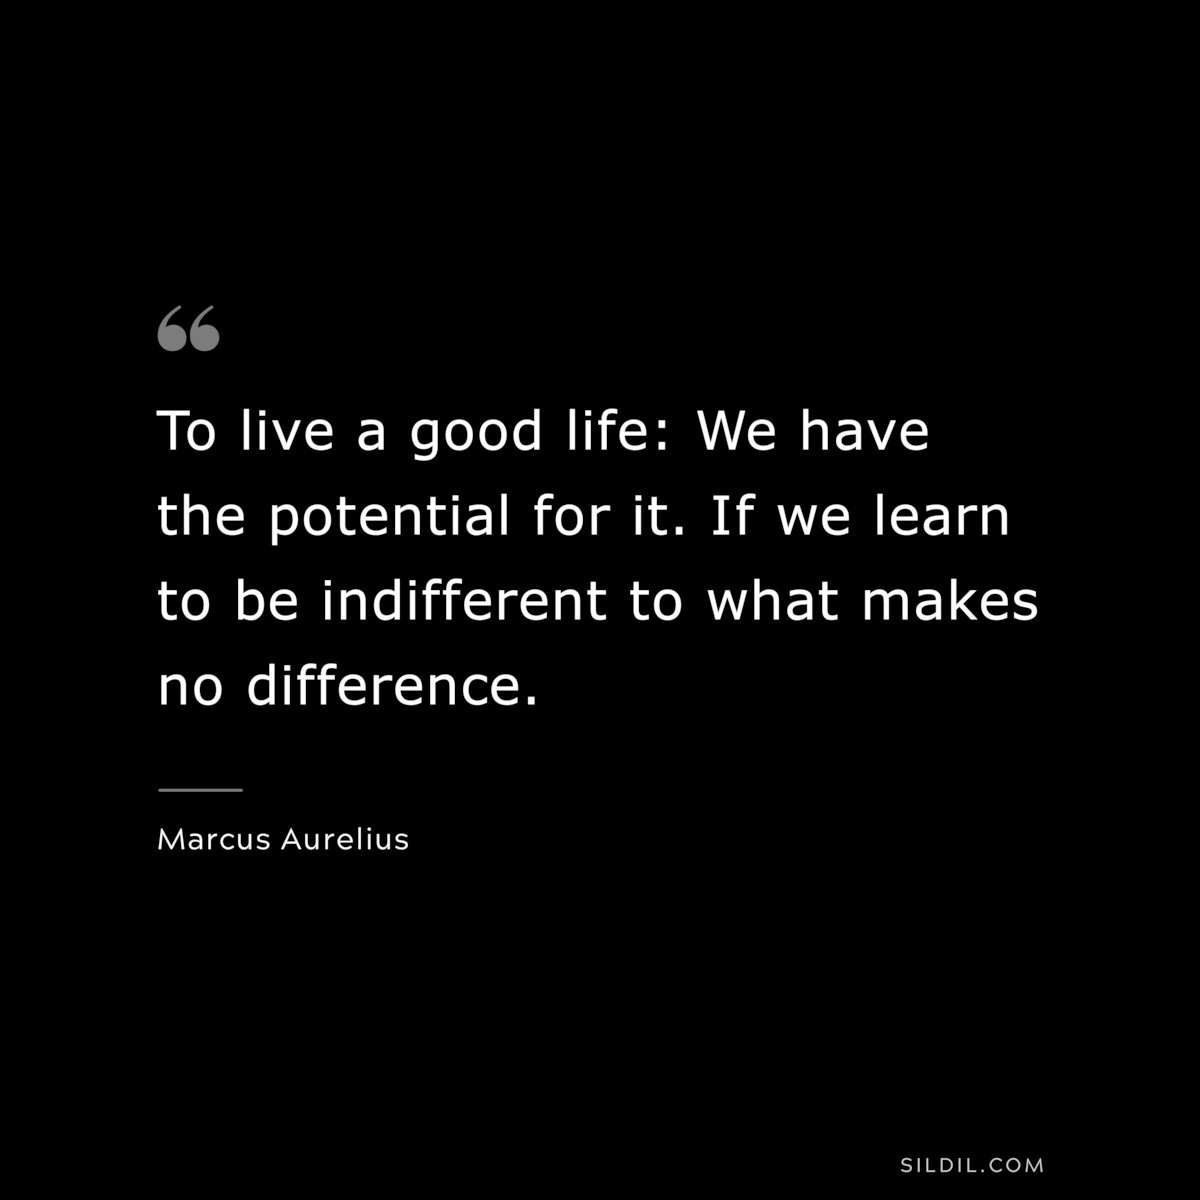 To live a good life: We have the potential for it. If we learn to be indifferent to what makes no difference. ― Marcus Aurelius